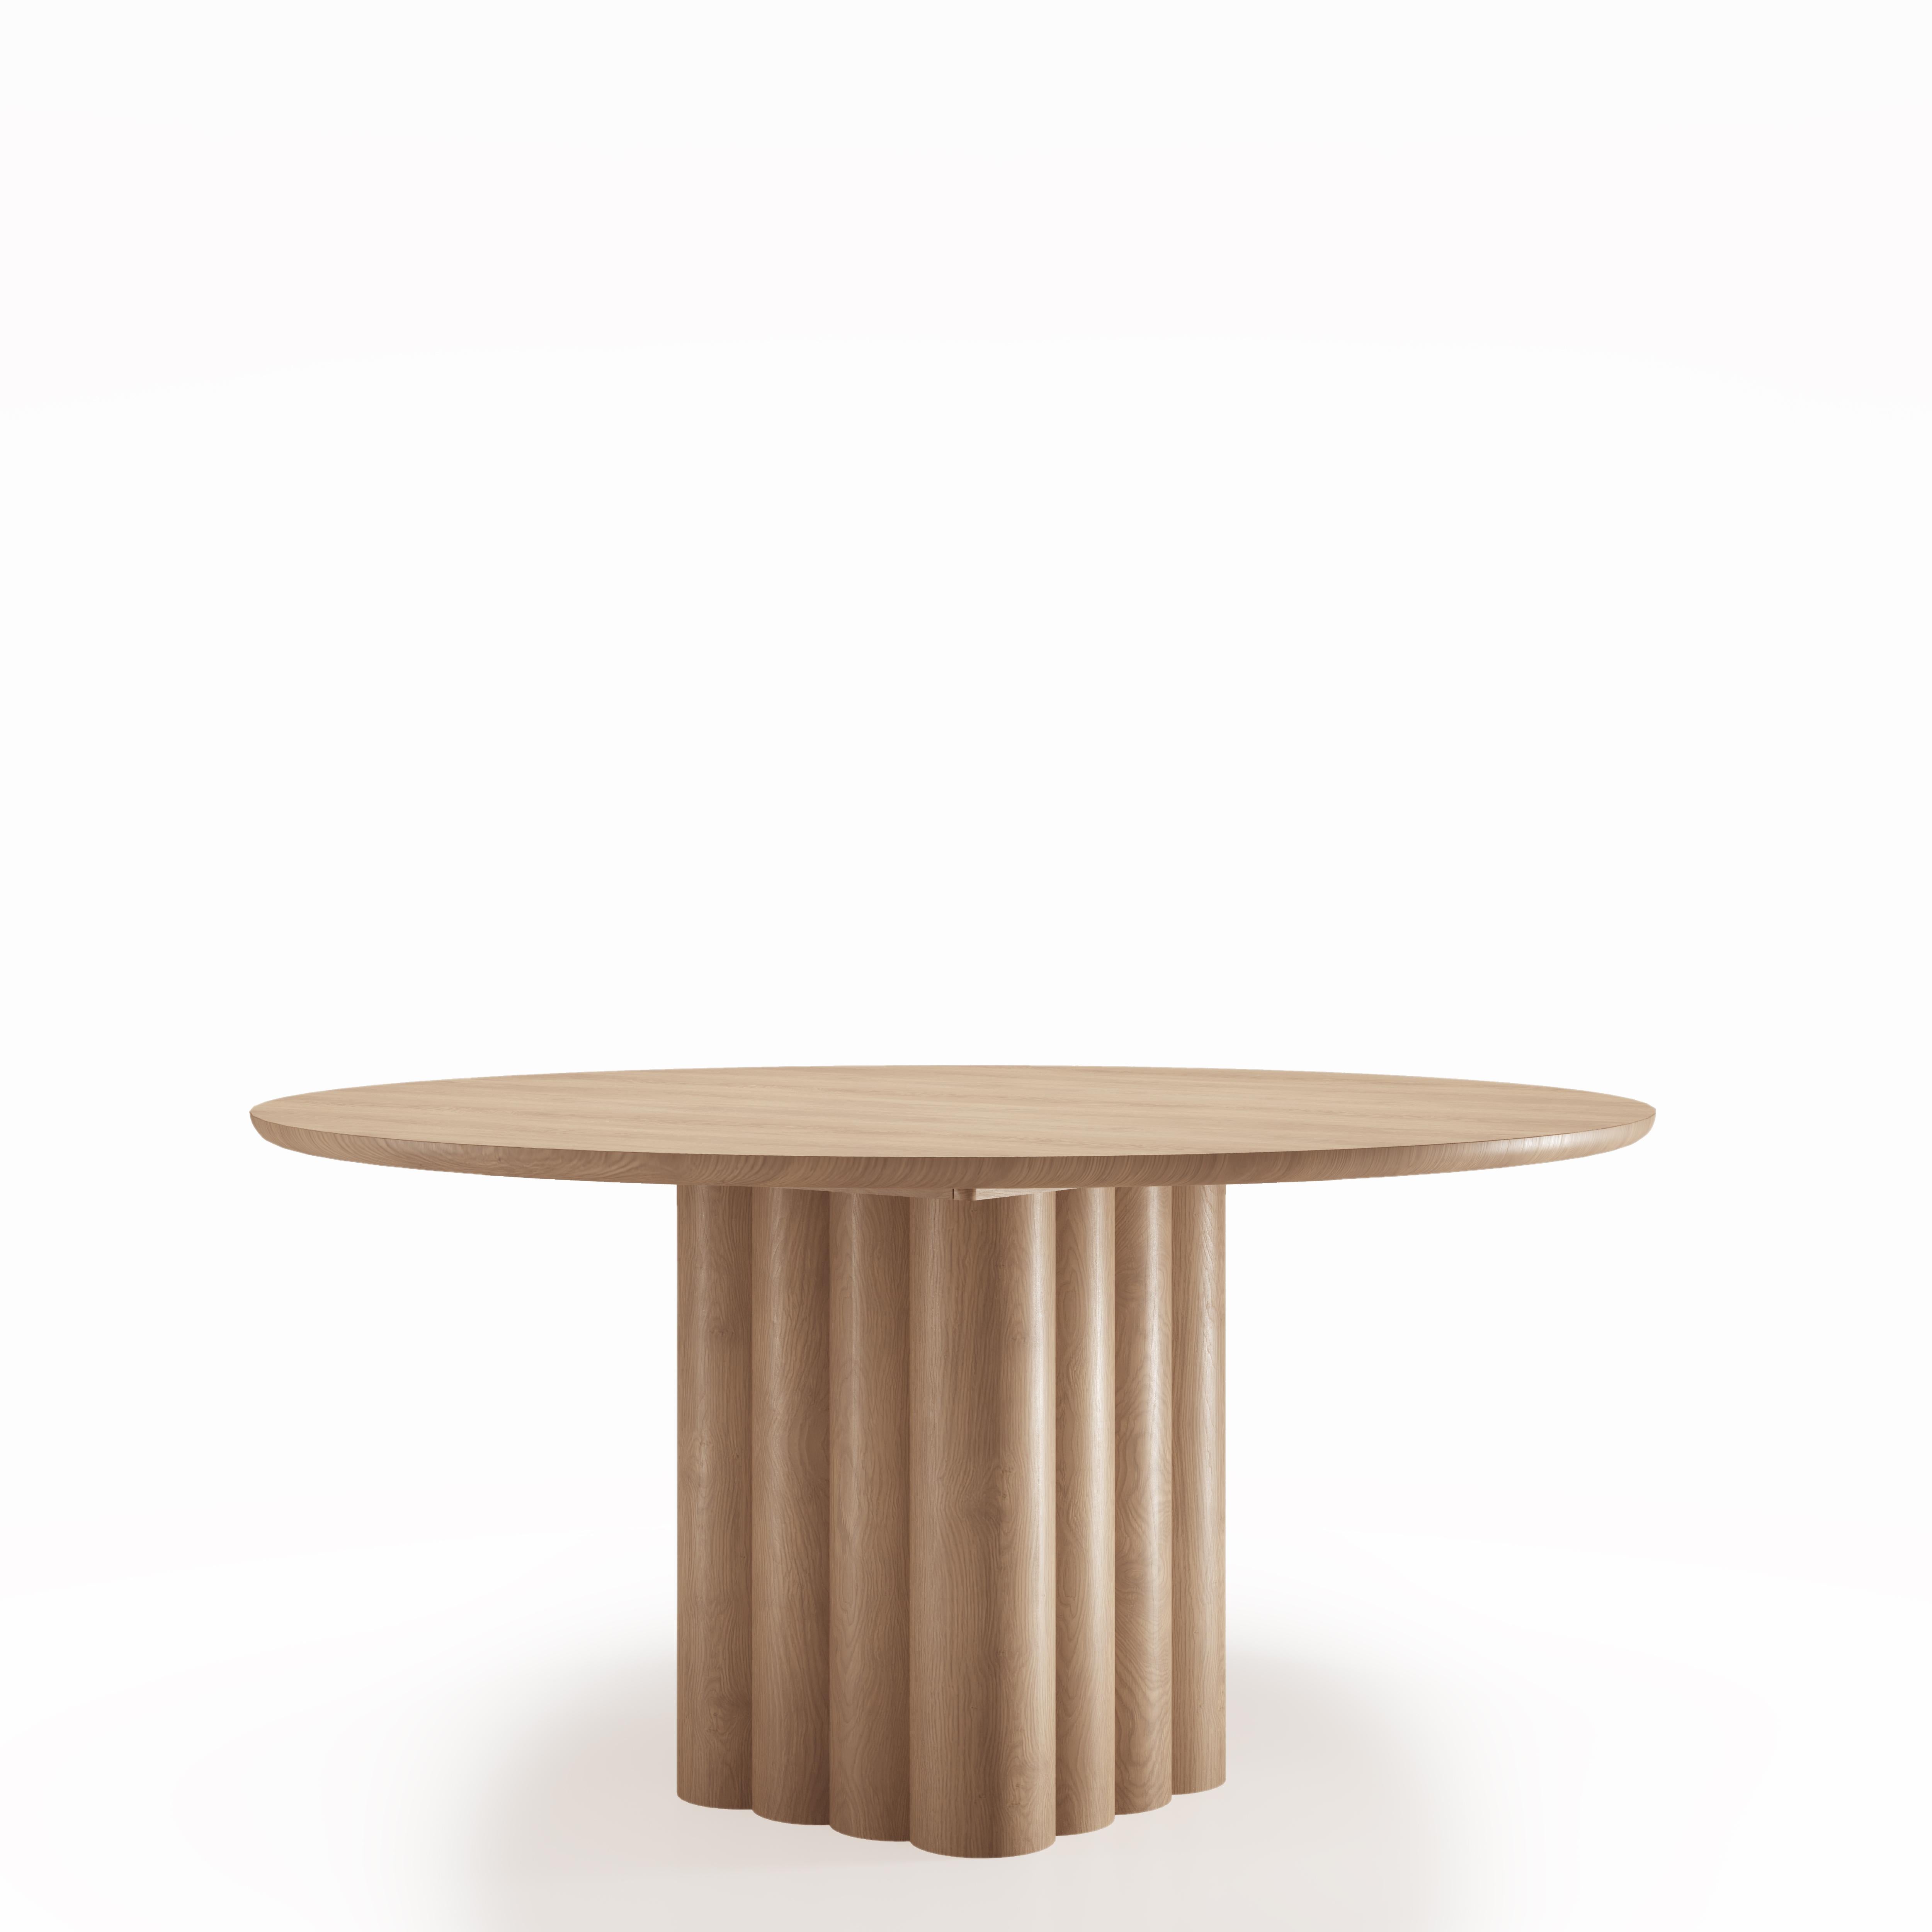 Round Dining Table 'Plush' by Dk3, Smoked Oak or Walnut, 150 cm For Sale 8